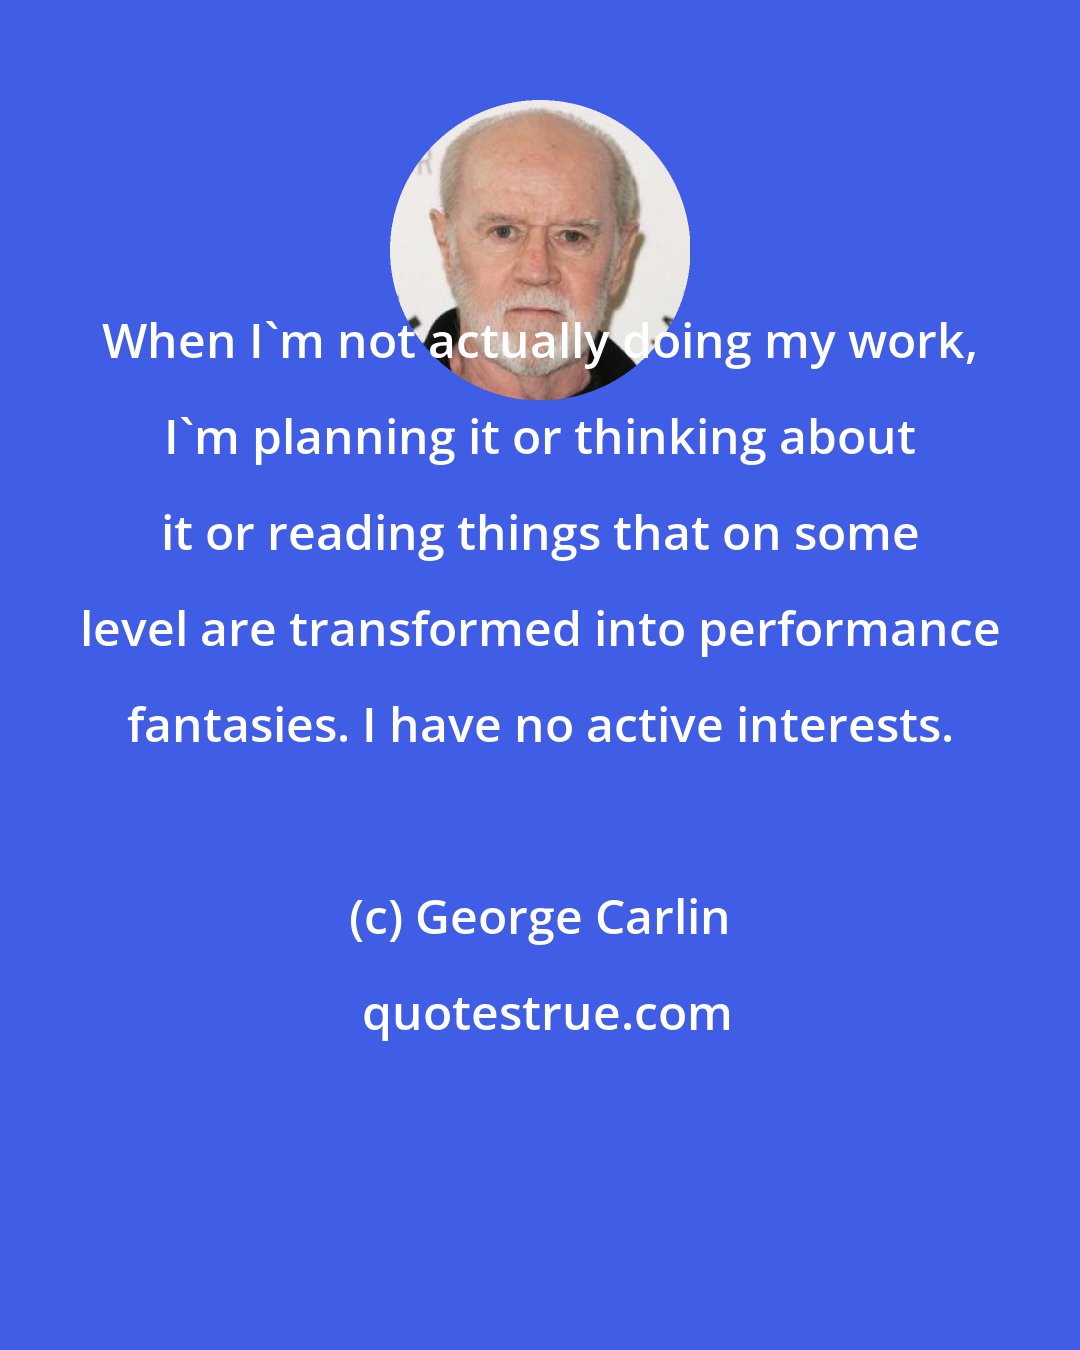 George Carlin: When I'm not actually doing my work, I'm planning it or thinking about it or reading things that on some level are transformed into performance fantasies. I have no active interests.